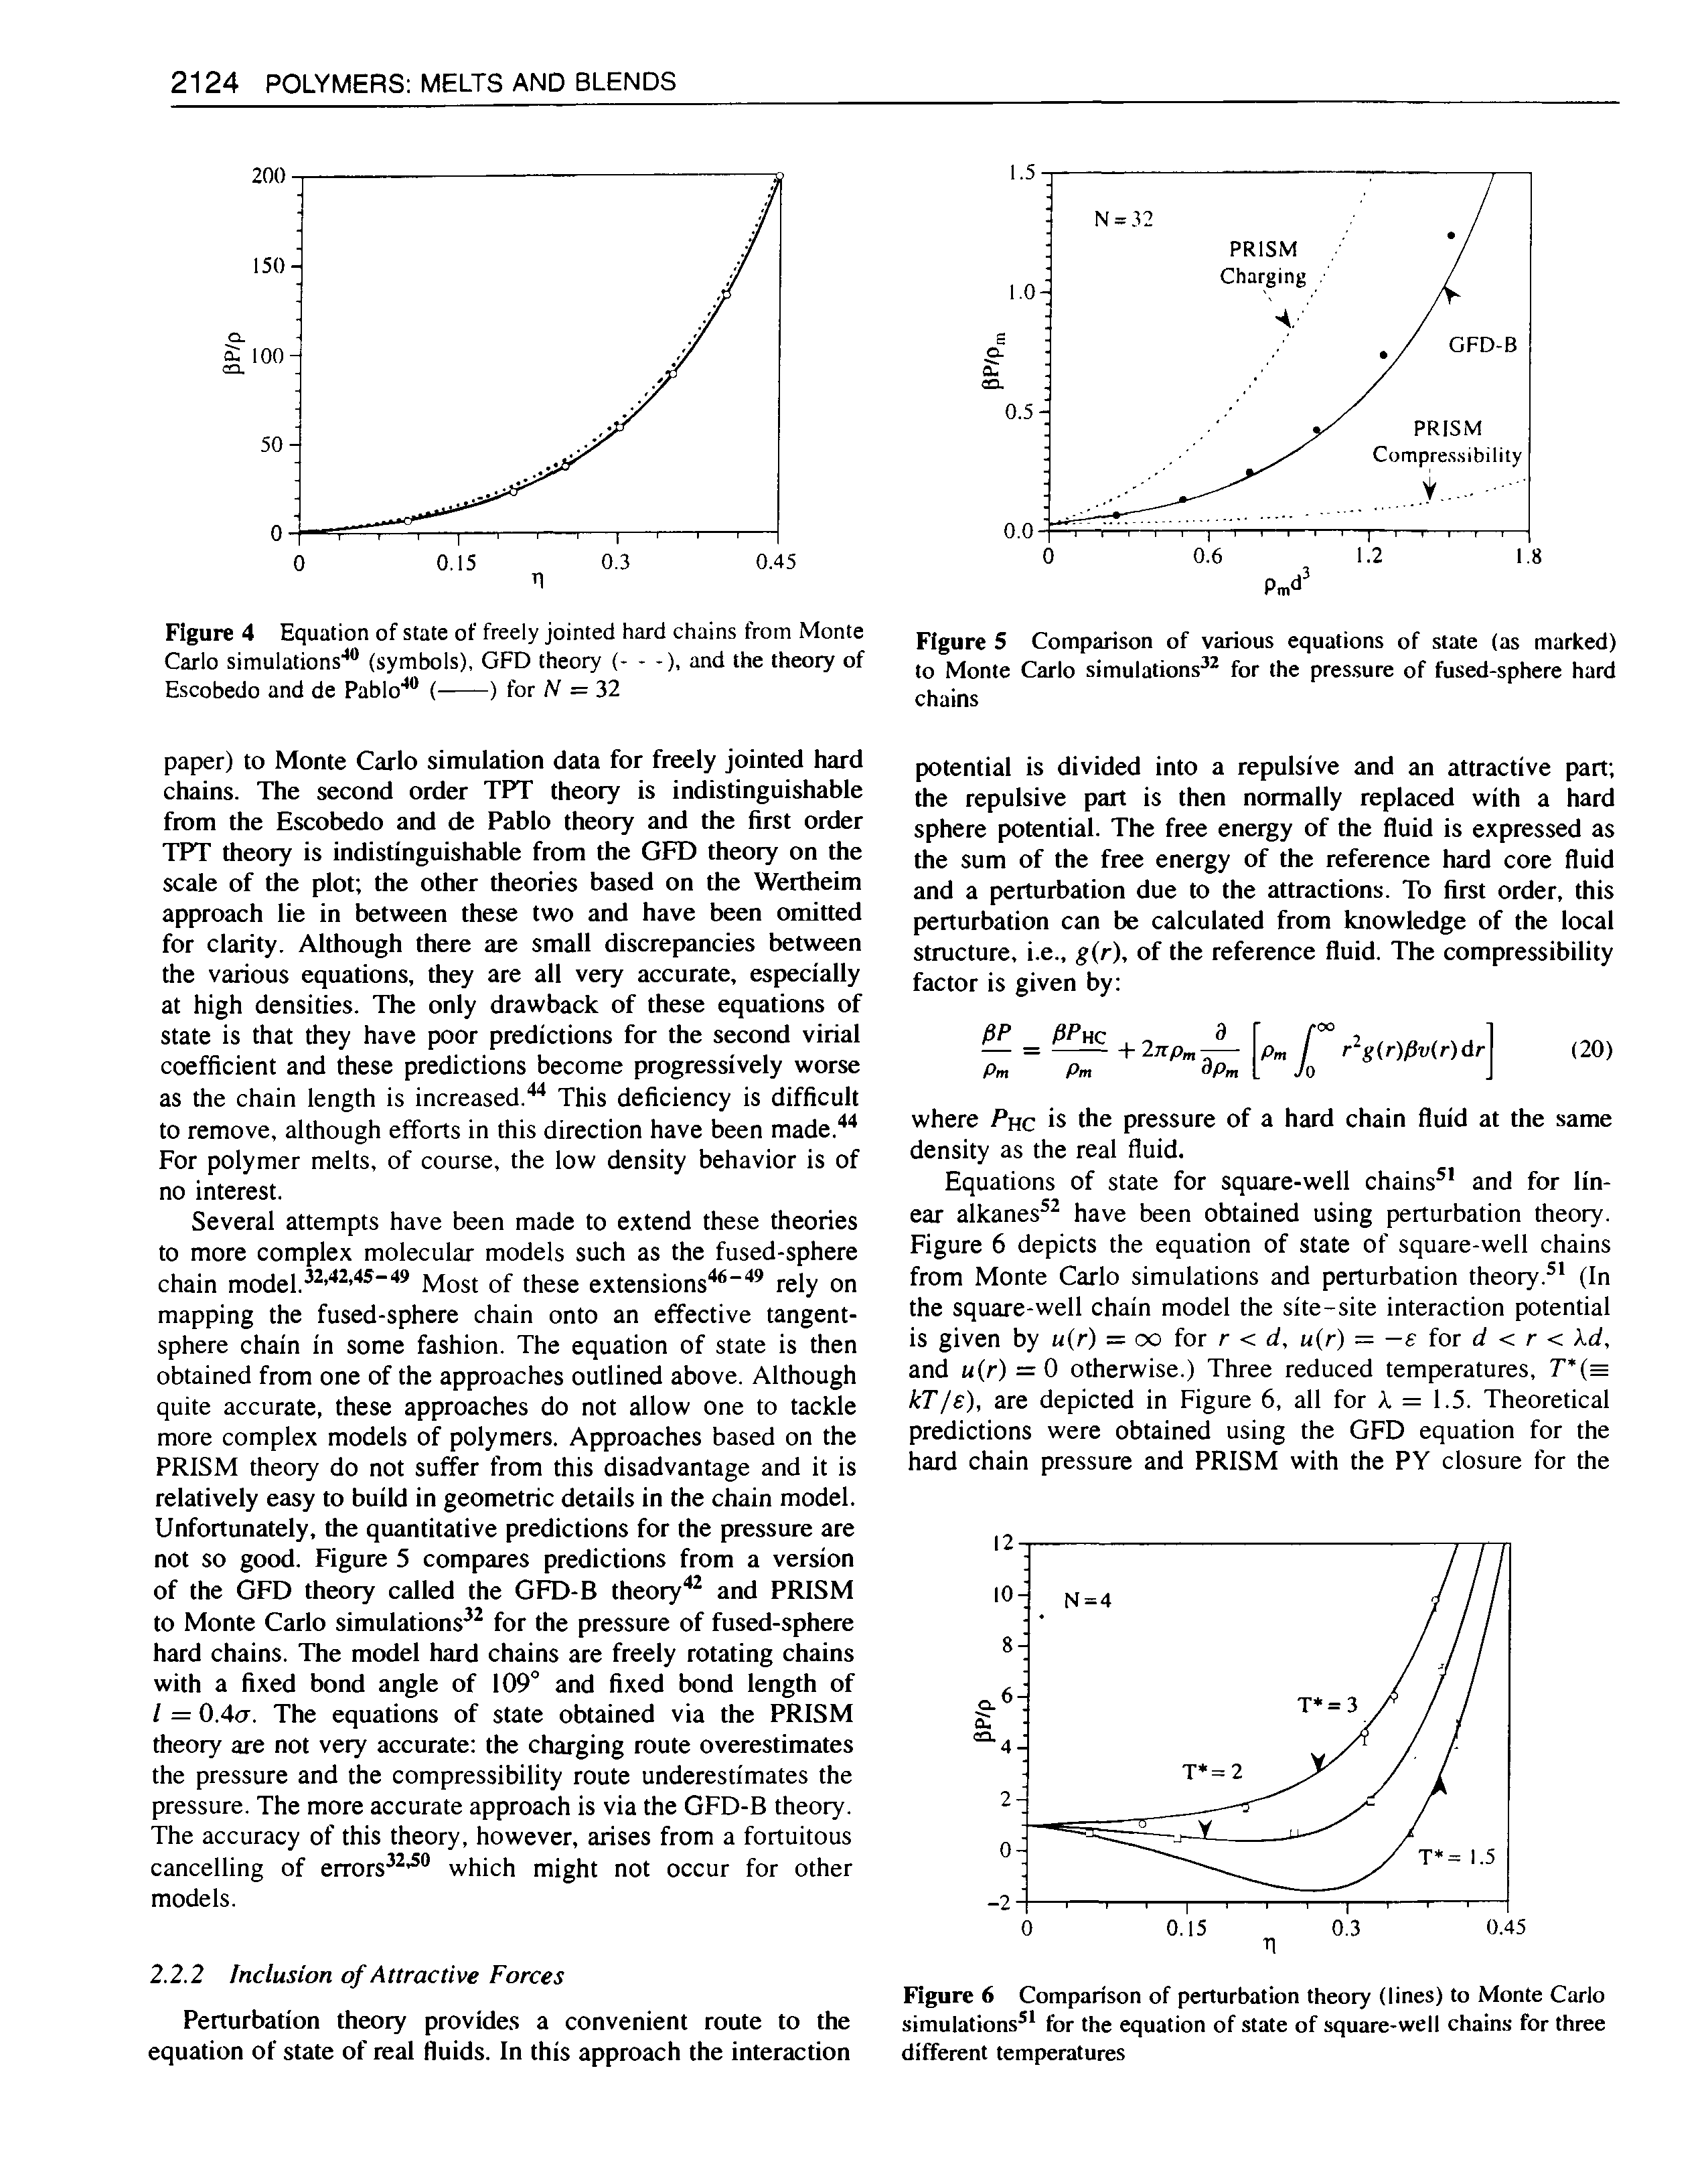 Figure 6 Comparison of perturbation theory (lines) to Monte Carlo simulations for the equation of state of square-well chains for three different temperatures...